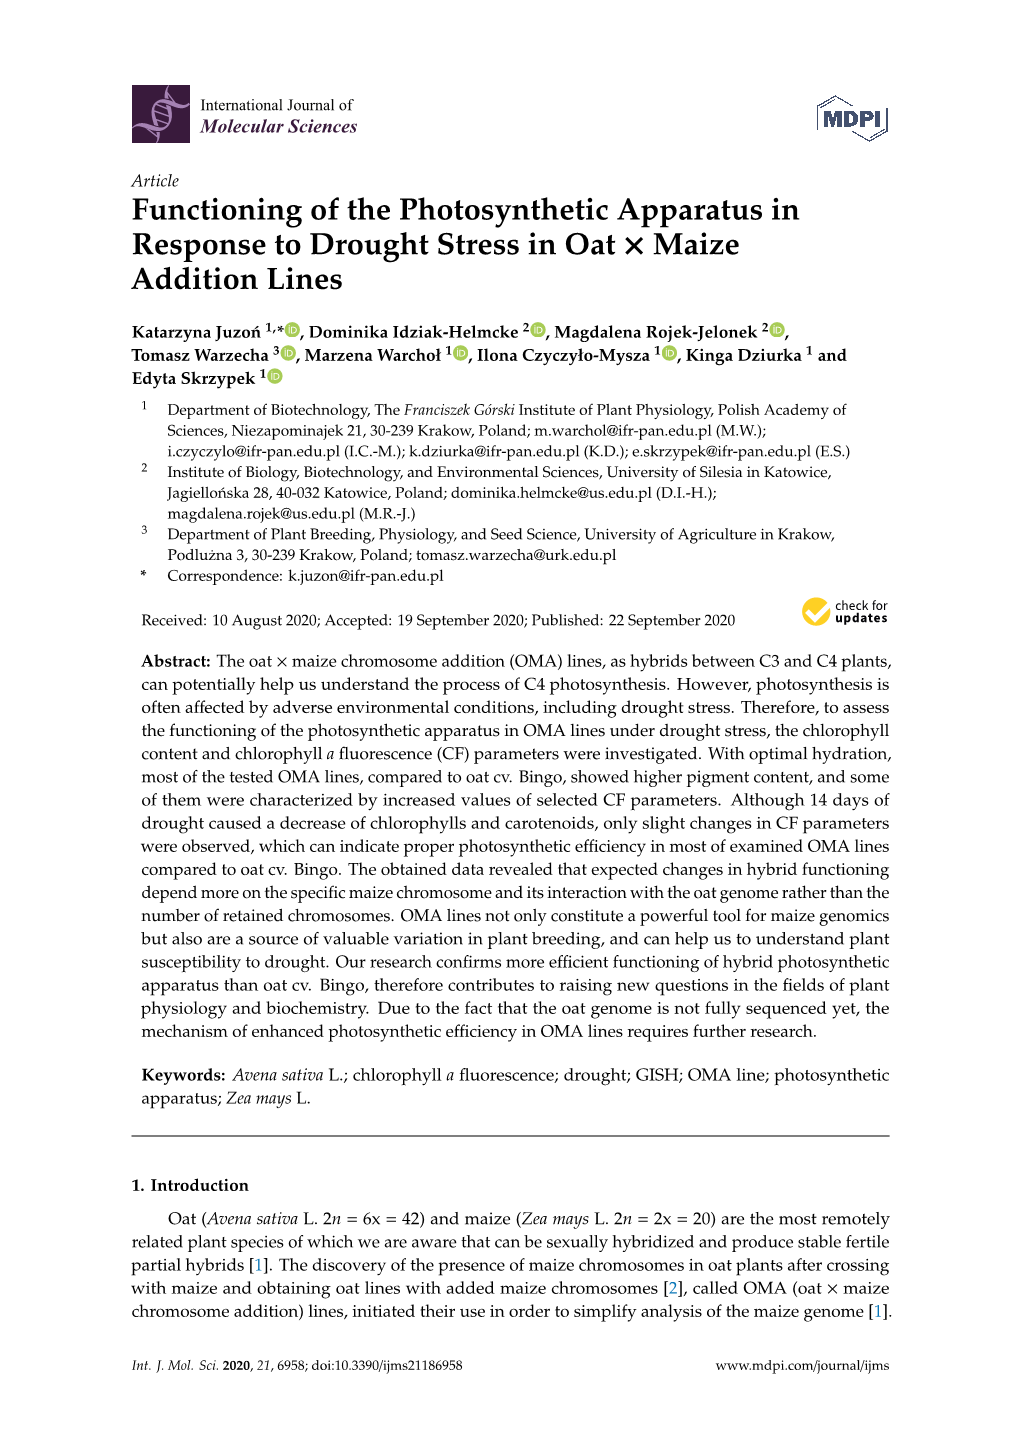 Functioning of the Photosynthetic Apparatus in Response to Drought Stress in Oat × Maize Addition Lines